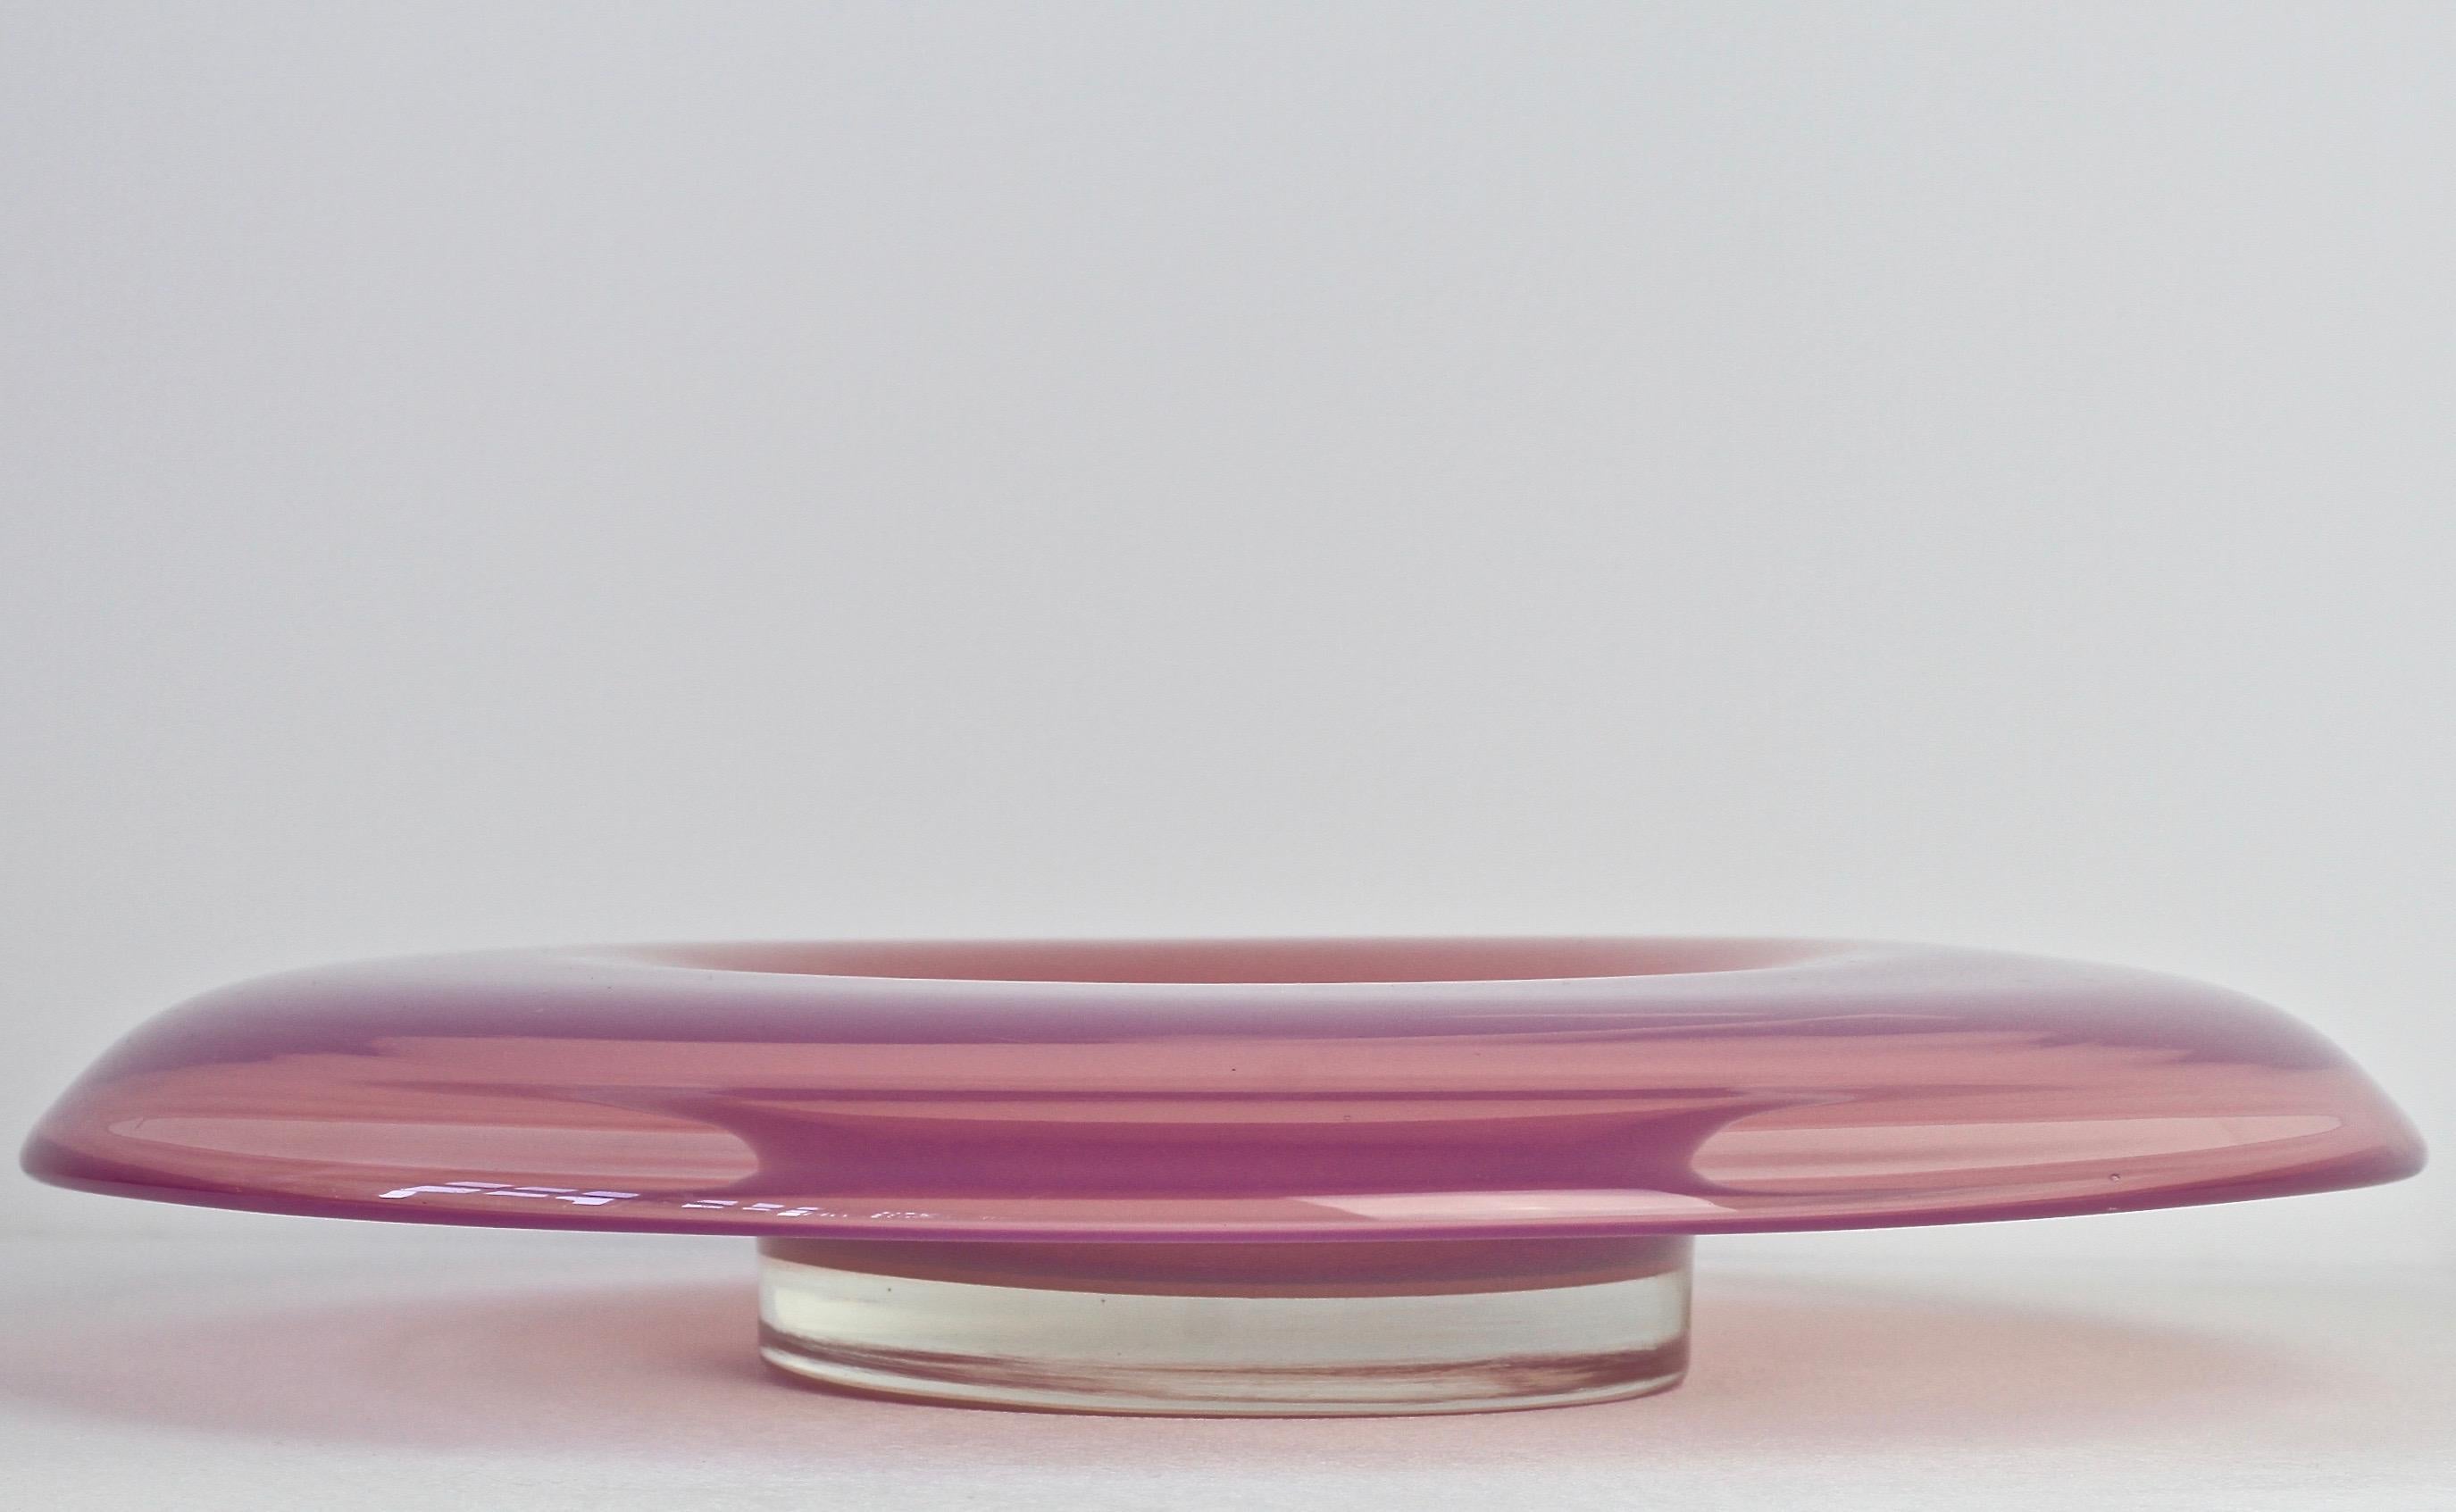 Murano 'Opalino' glass serving or dipping bowl designed by Antonio Da Ros (1936-2012) for Cenedese, circa 1970-1990. Wonderful translucent color of vibrant pink. Simplistic yet elegant forms - almost futuristic. Very fun to dine with the vibrant